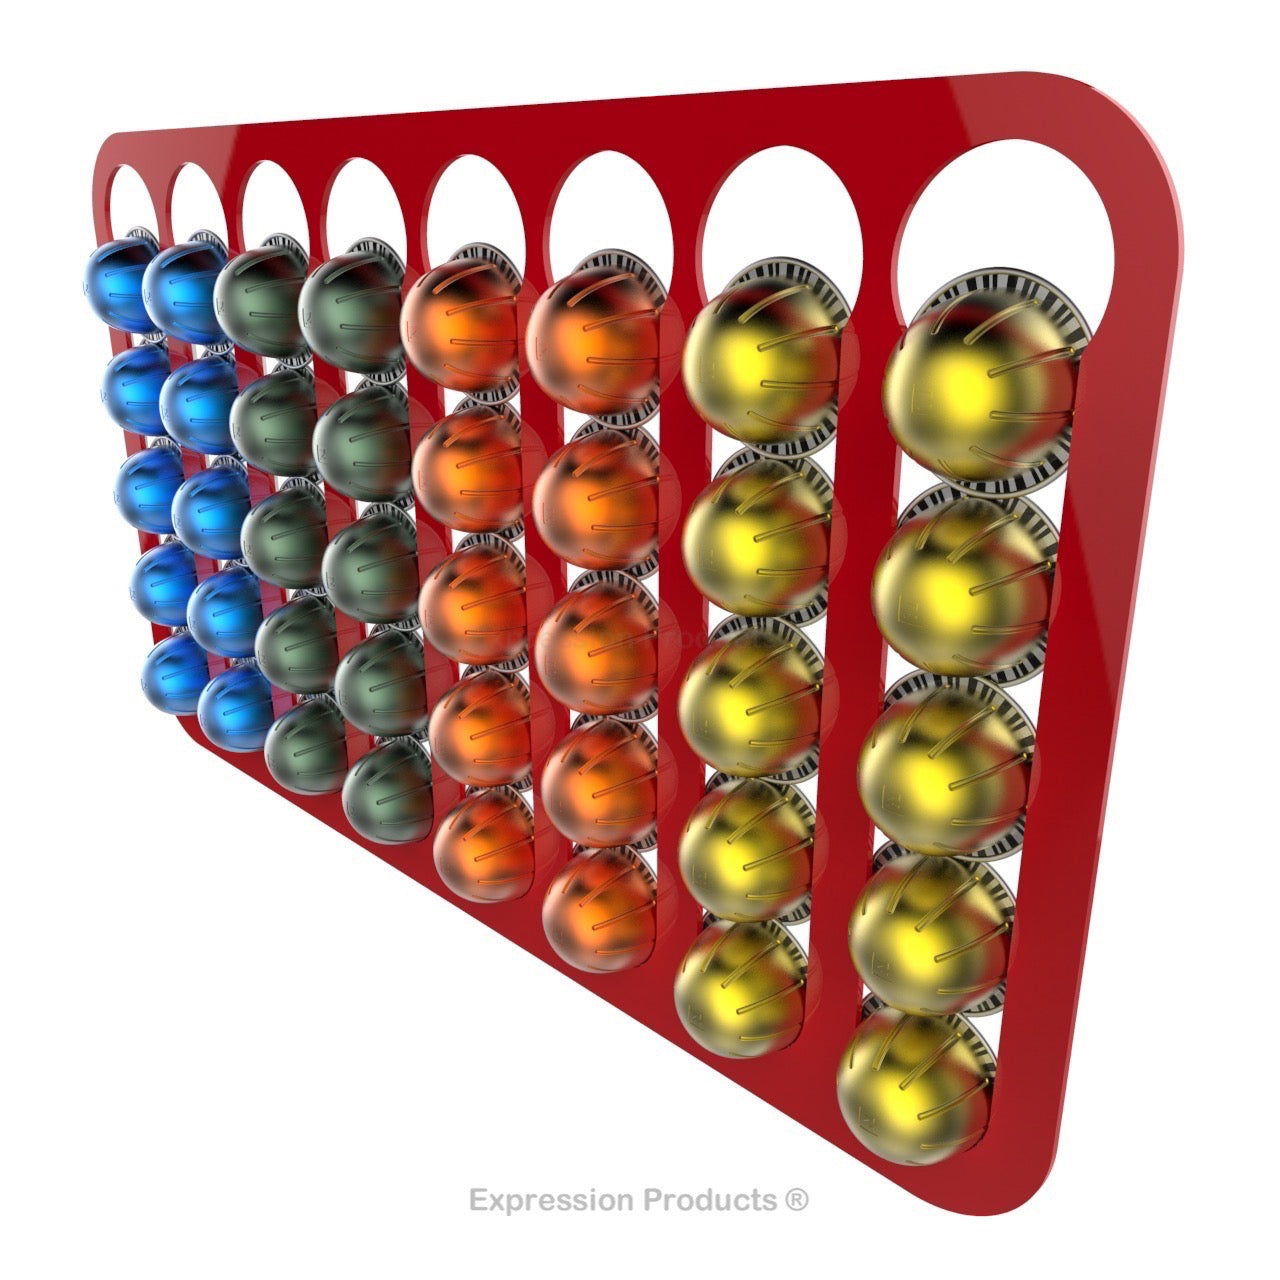 Magnetic Nespresso Vertuo capsule holder shown in red holding 40 pods